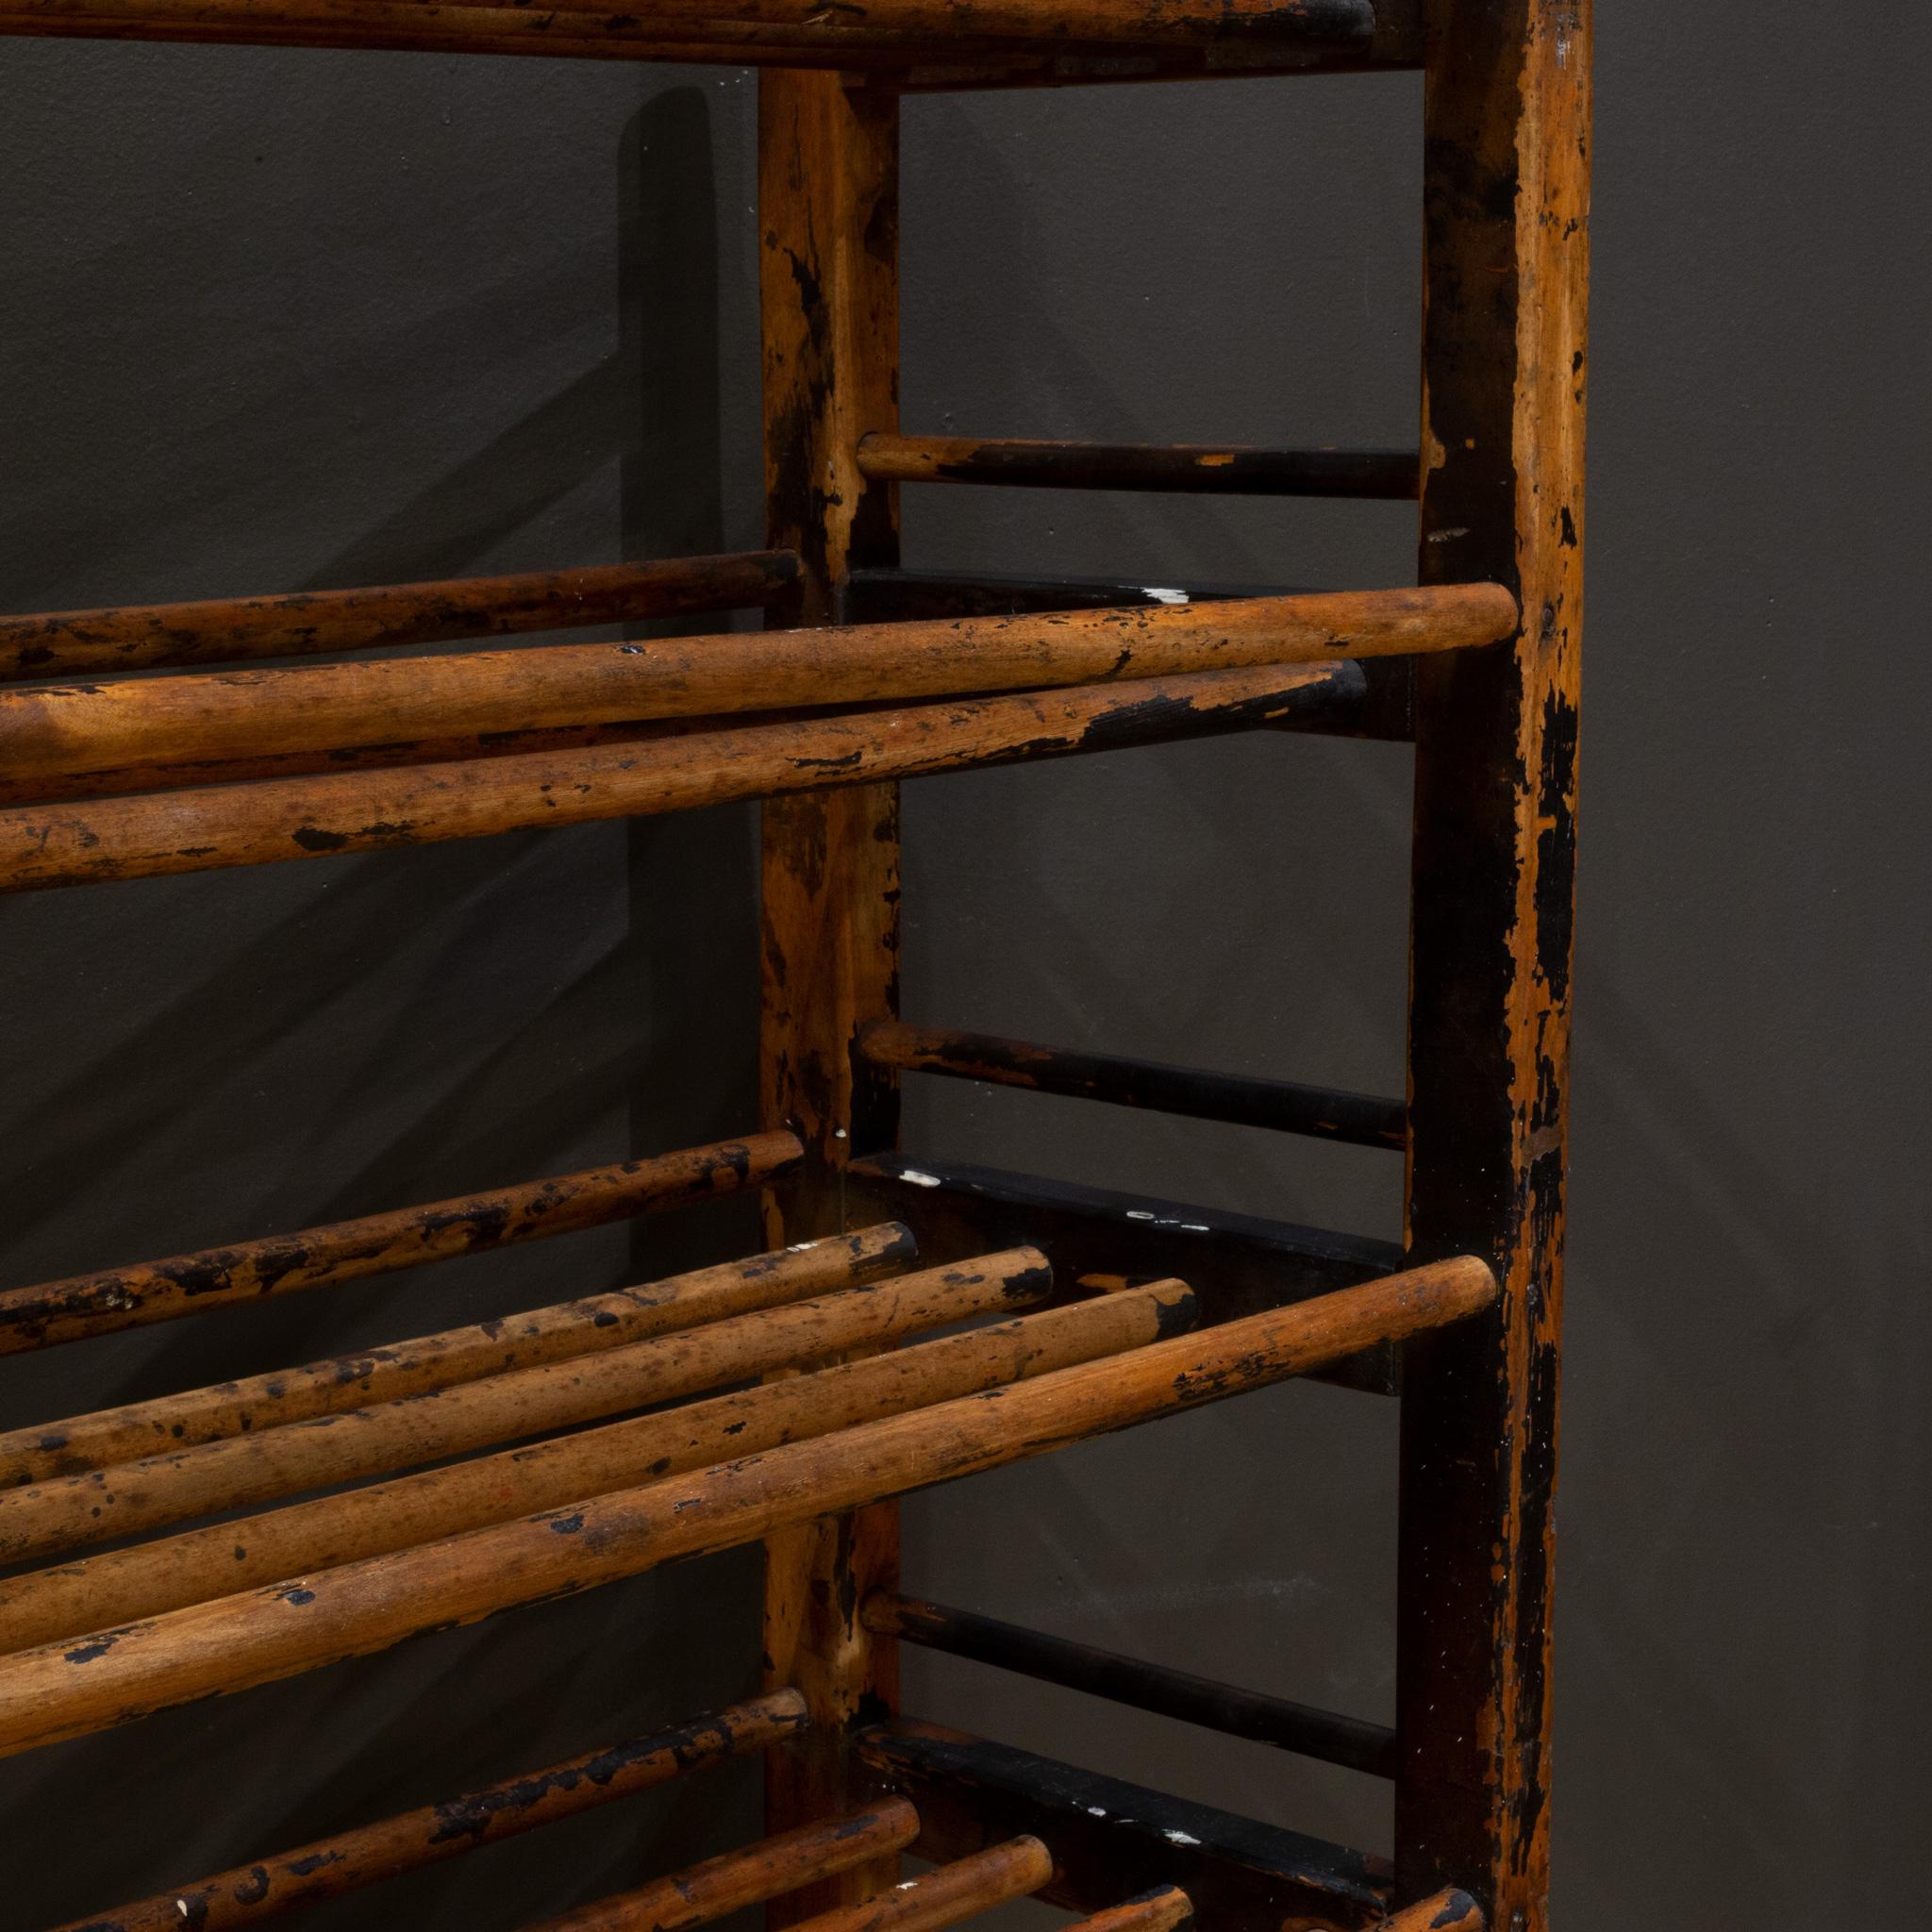 Wood Late 19th c./Early 20th c. Cobbler's Factory Shoe Rack c.1880-1920 For Sale